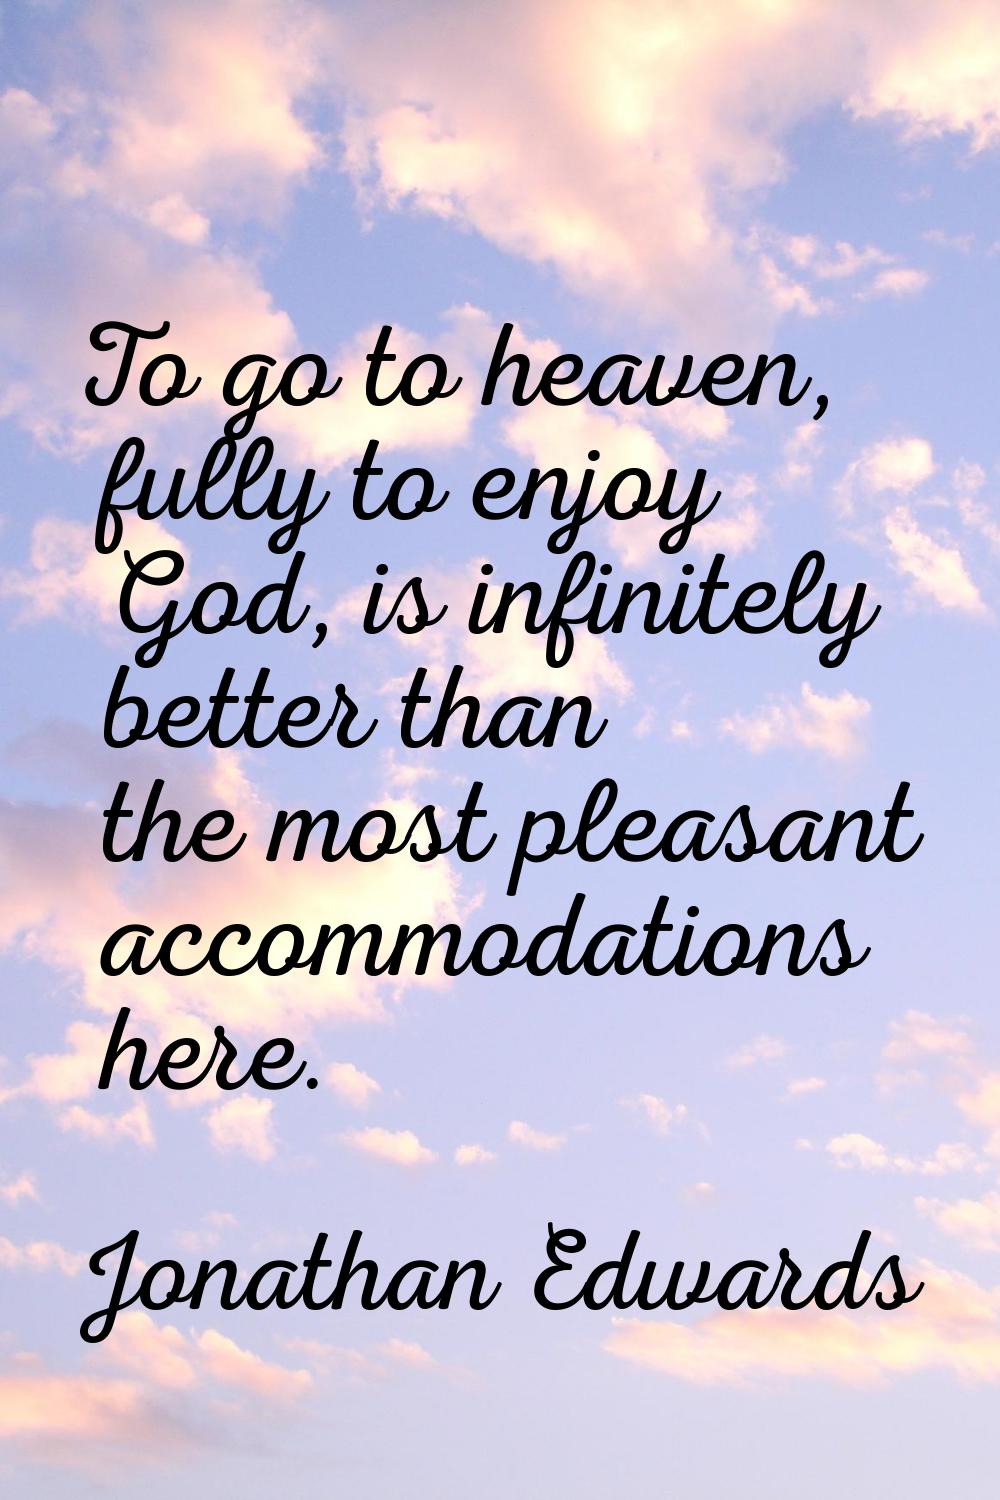 To go to heaven, fully to enjoy God, is infinitely better than the most pleasant accommodations her